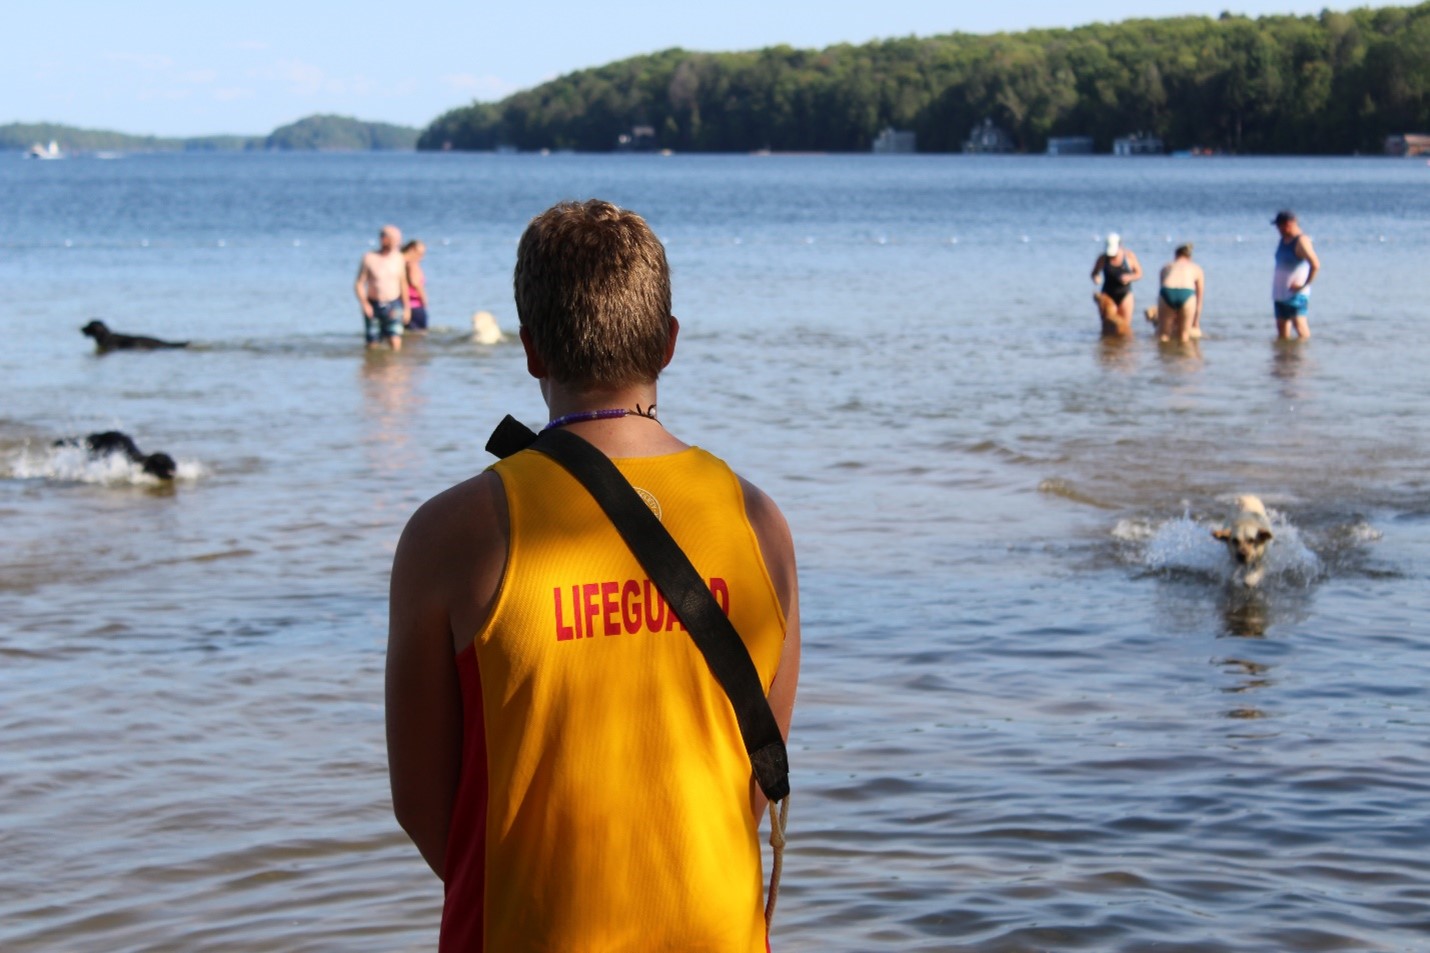 Male lifeguard facing the water where people with guide dogs are playing. He is wearing a yellow shirt with the word "Lifeguard" in red.